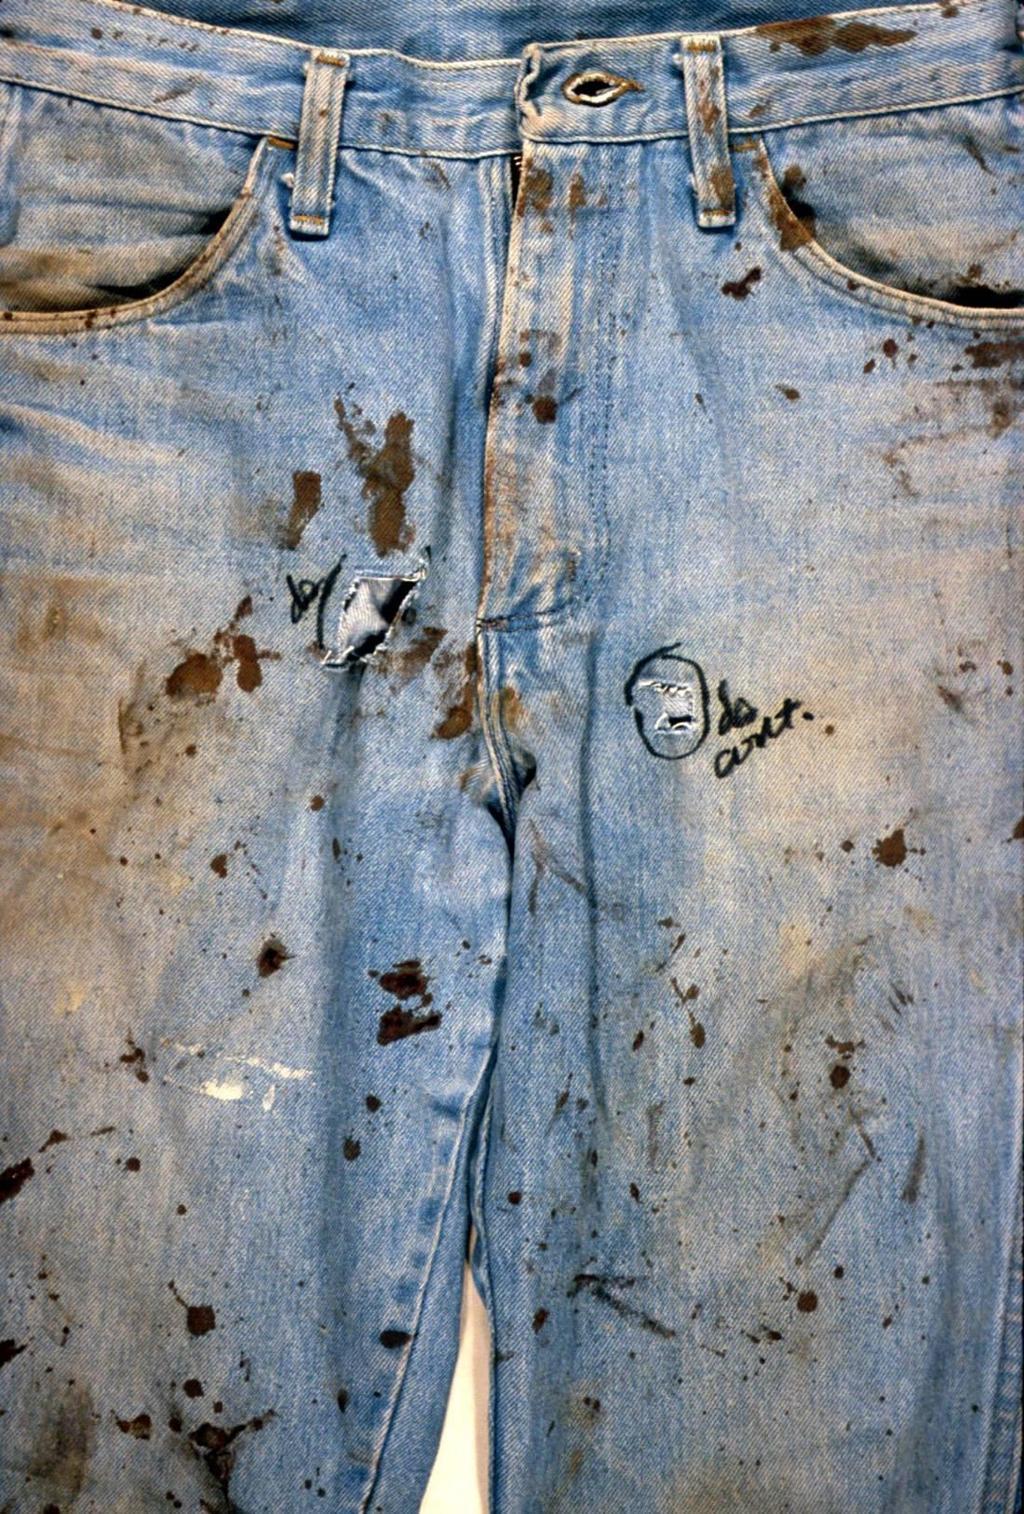 Blood Stains on Victim s Jeans Sections removed &